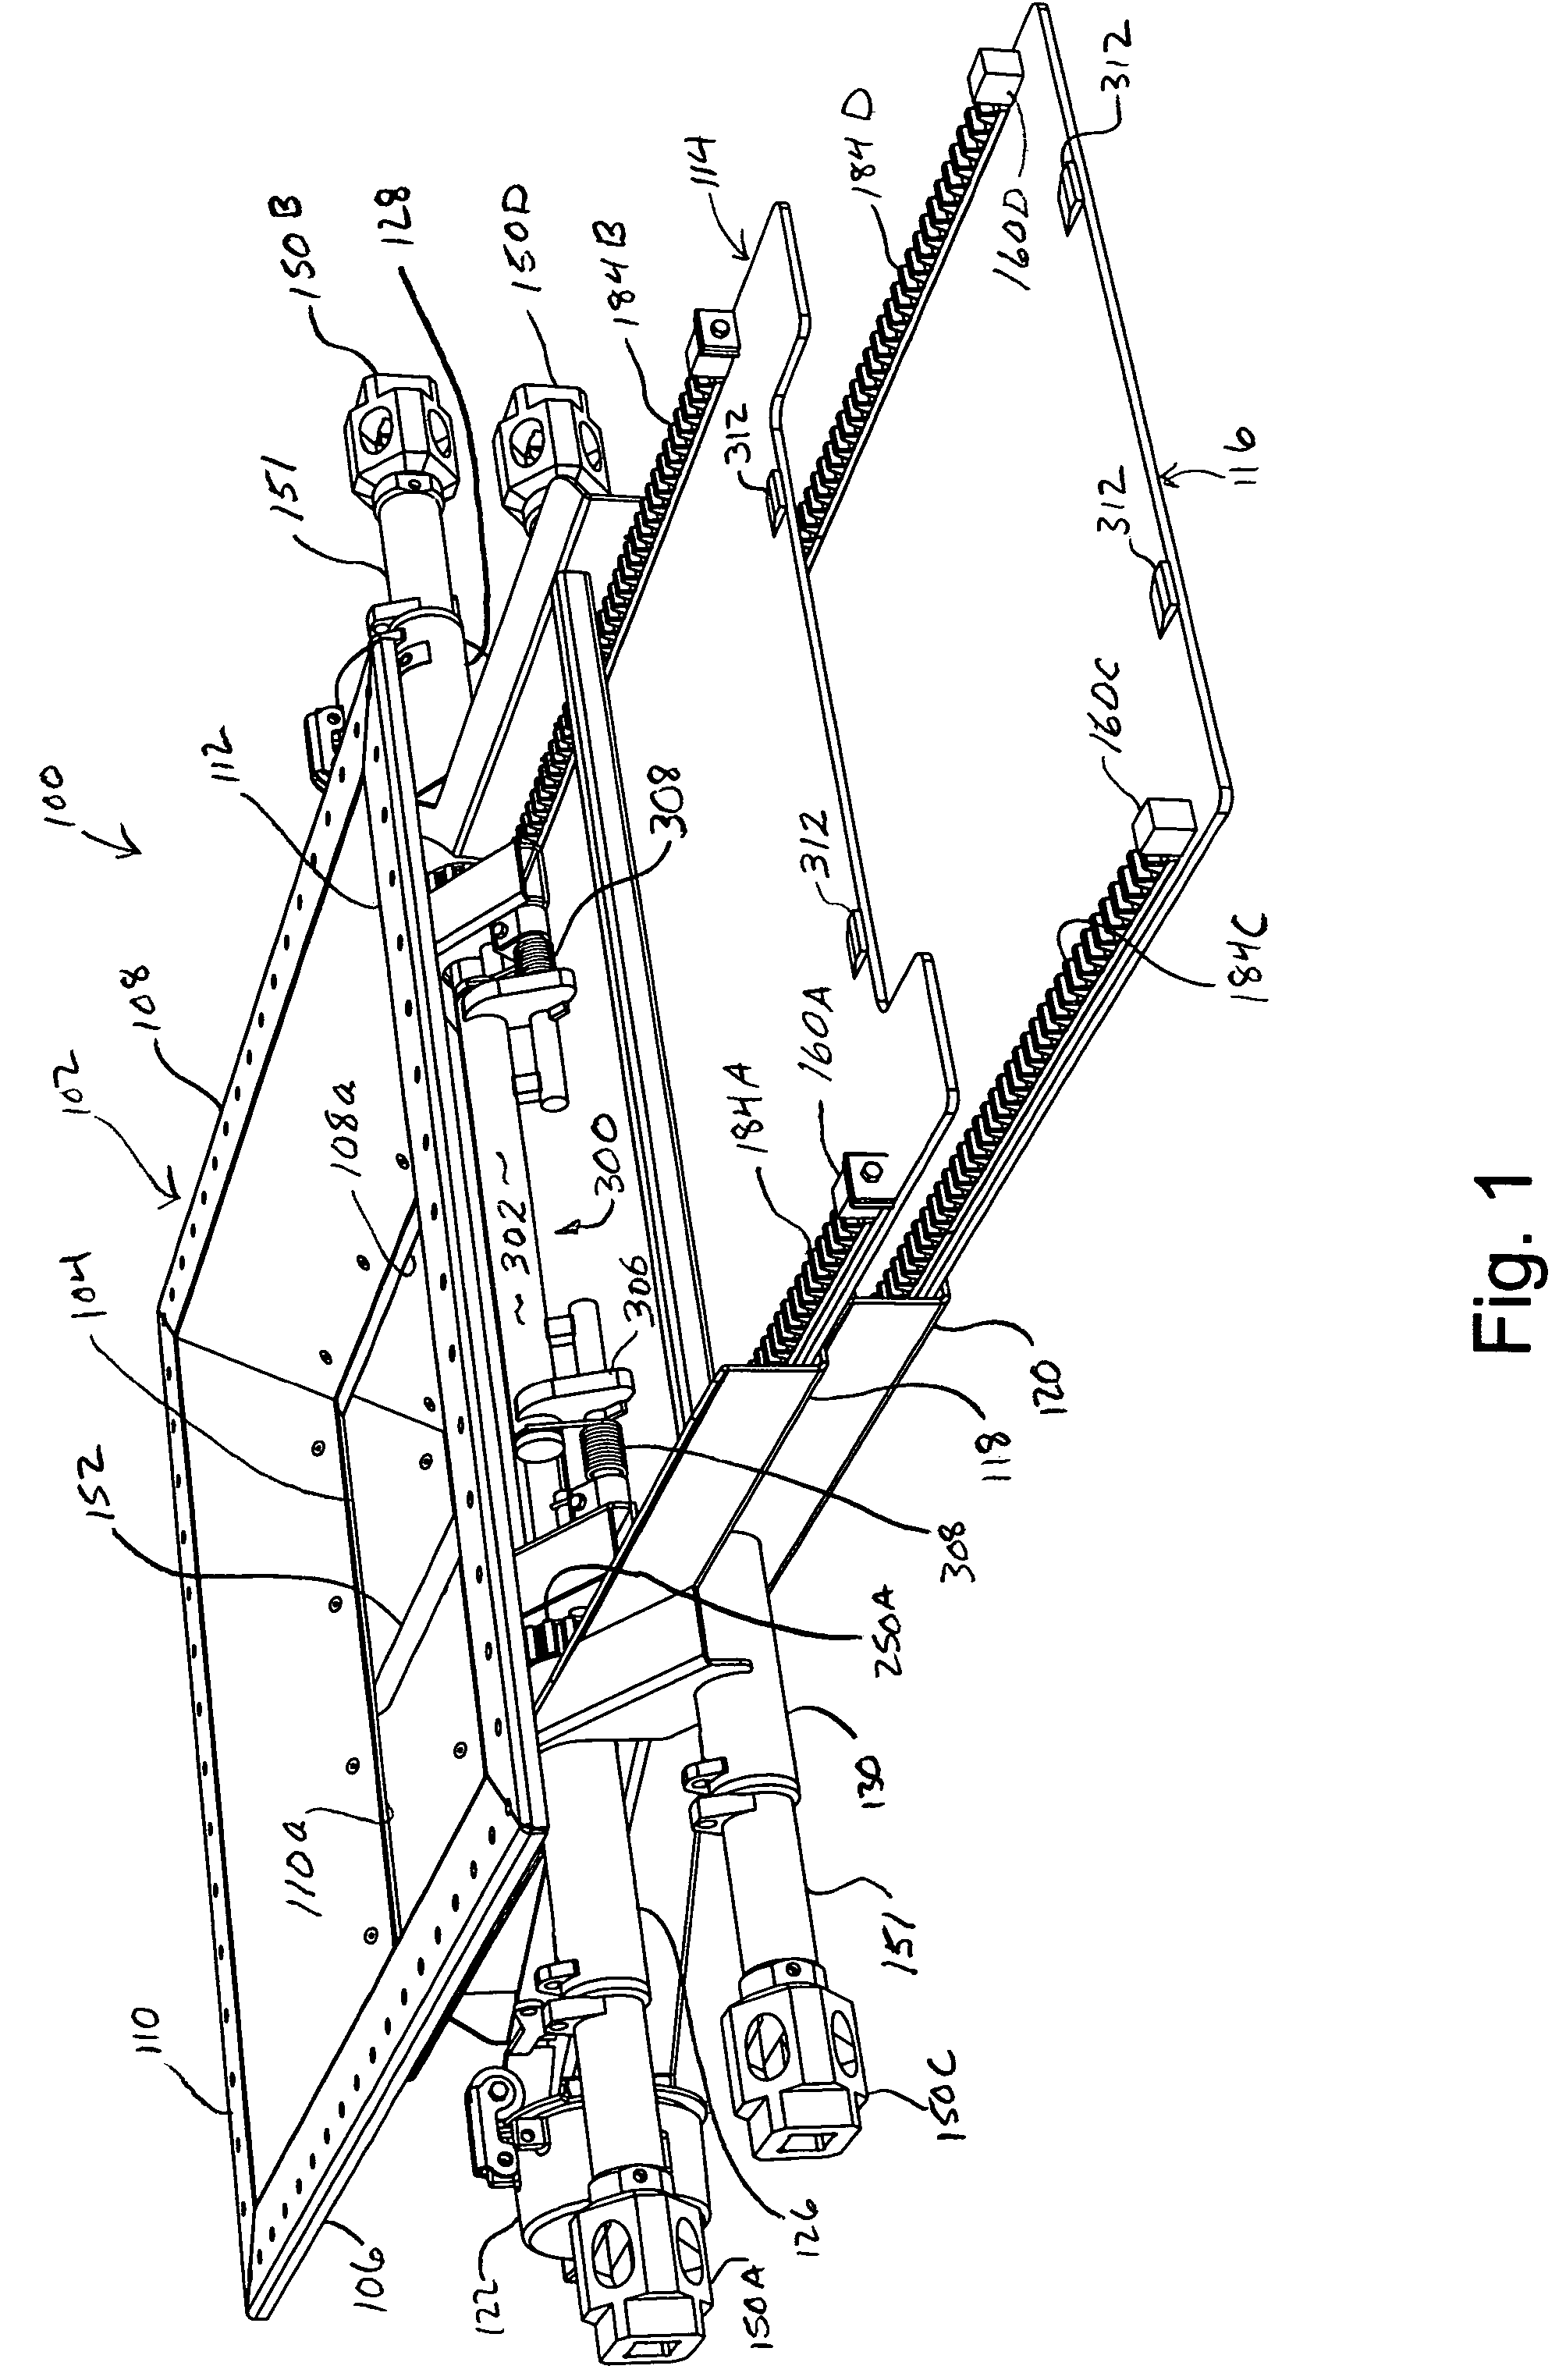 Drive system for a railway hopper car discharge gate